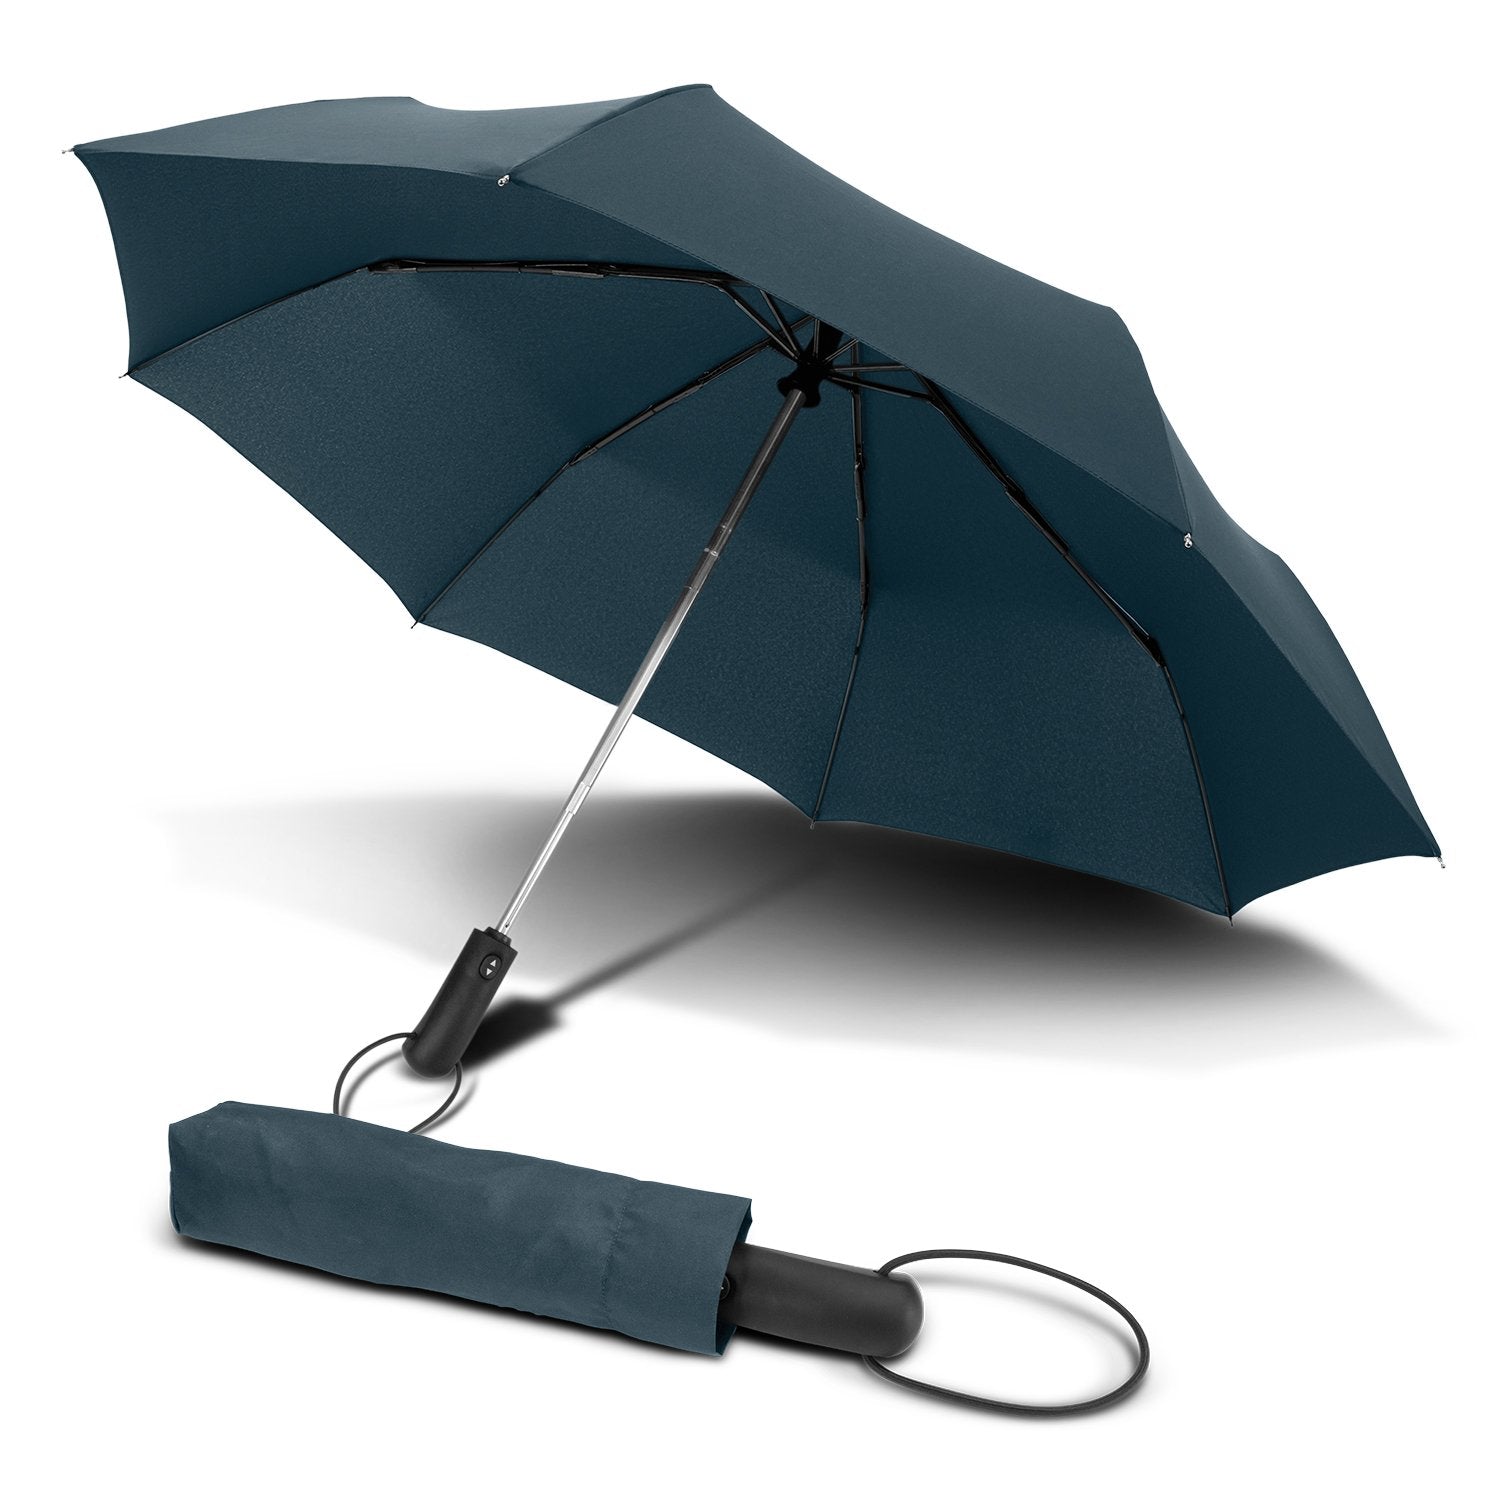 STORM PROOF ULTIMATE COMPACT®️  Premium Collapsible Umbrella With Heavy Duty Steel Frame  - SMART Automatic Open & Close Push Button Technology